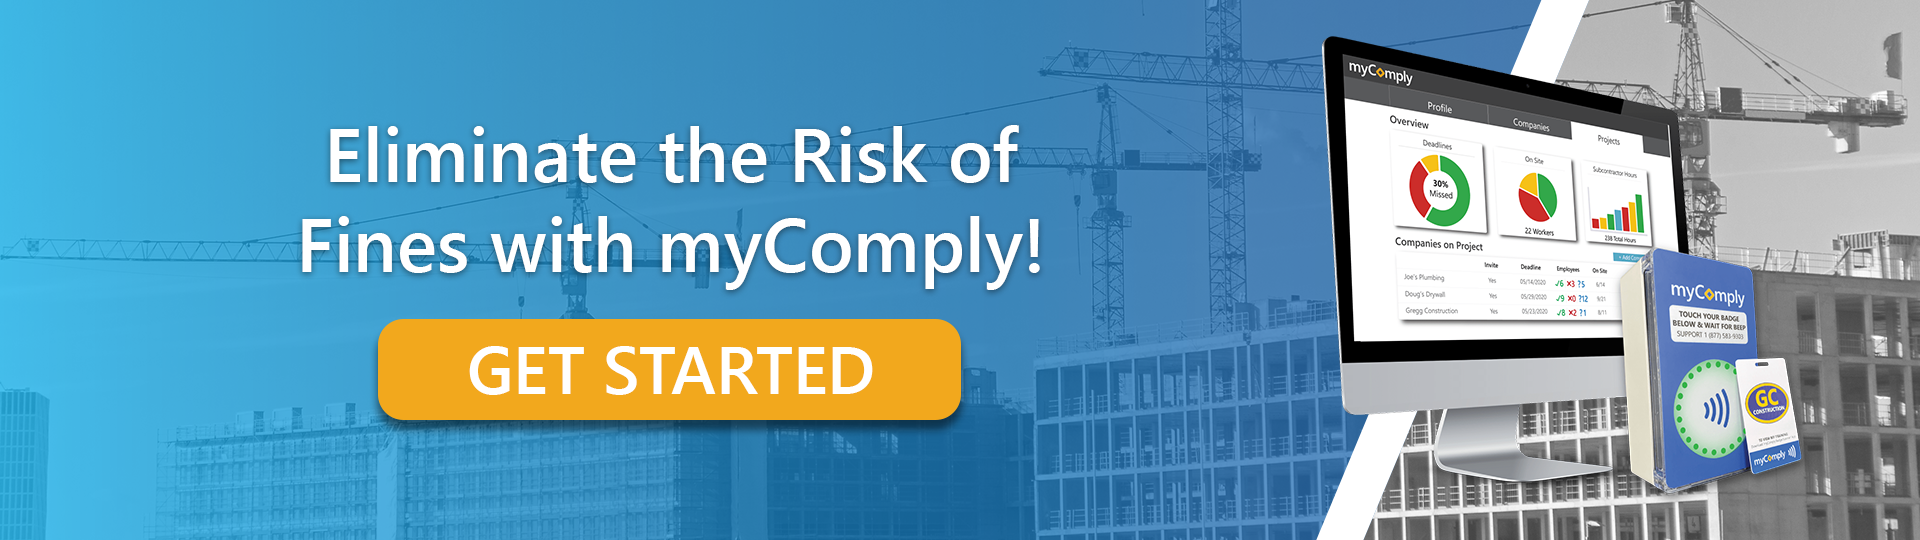 Eliminate the Risk of Fines with myComply